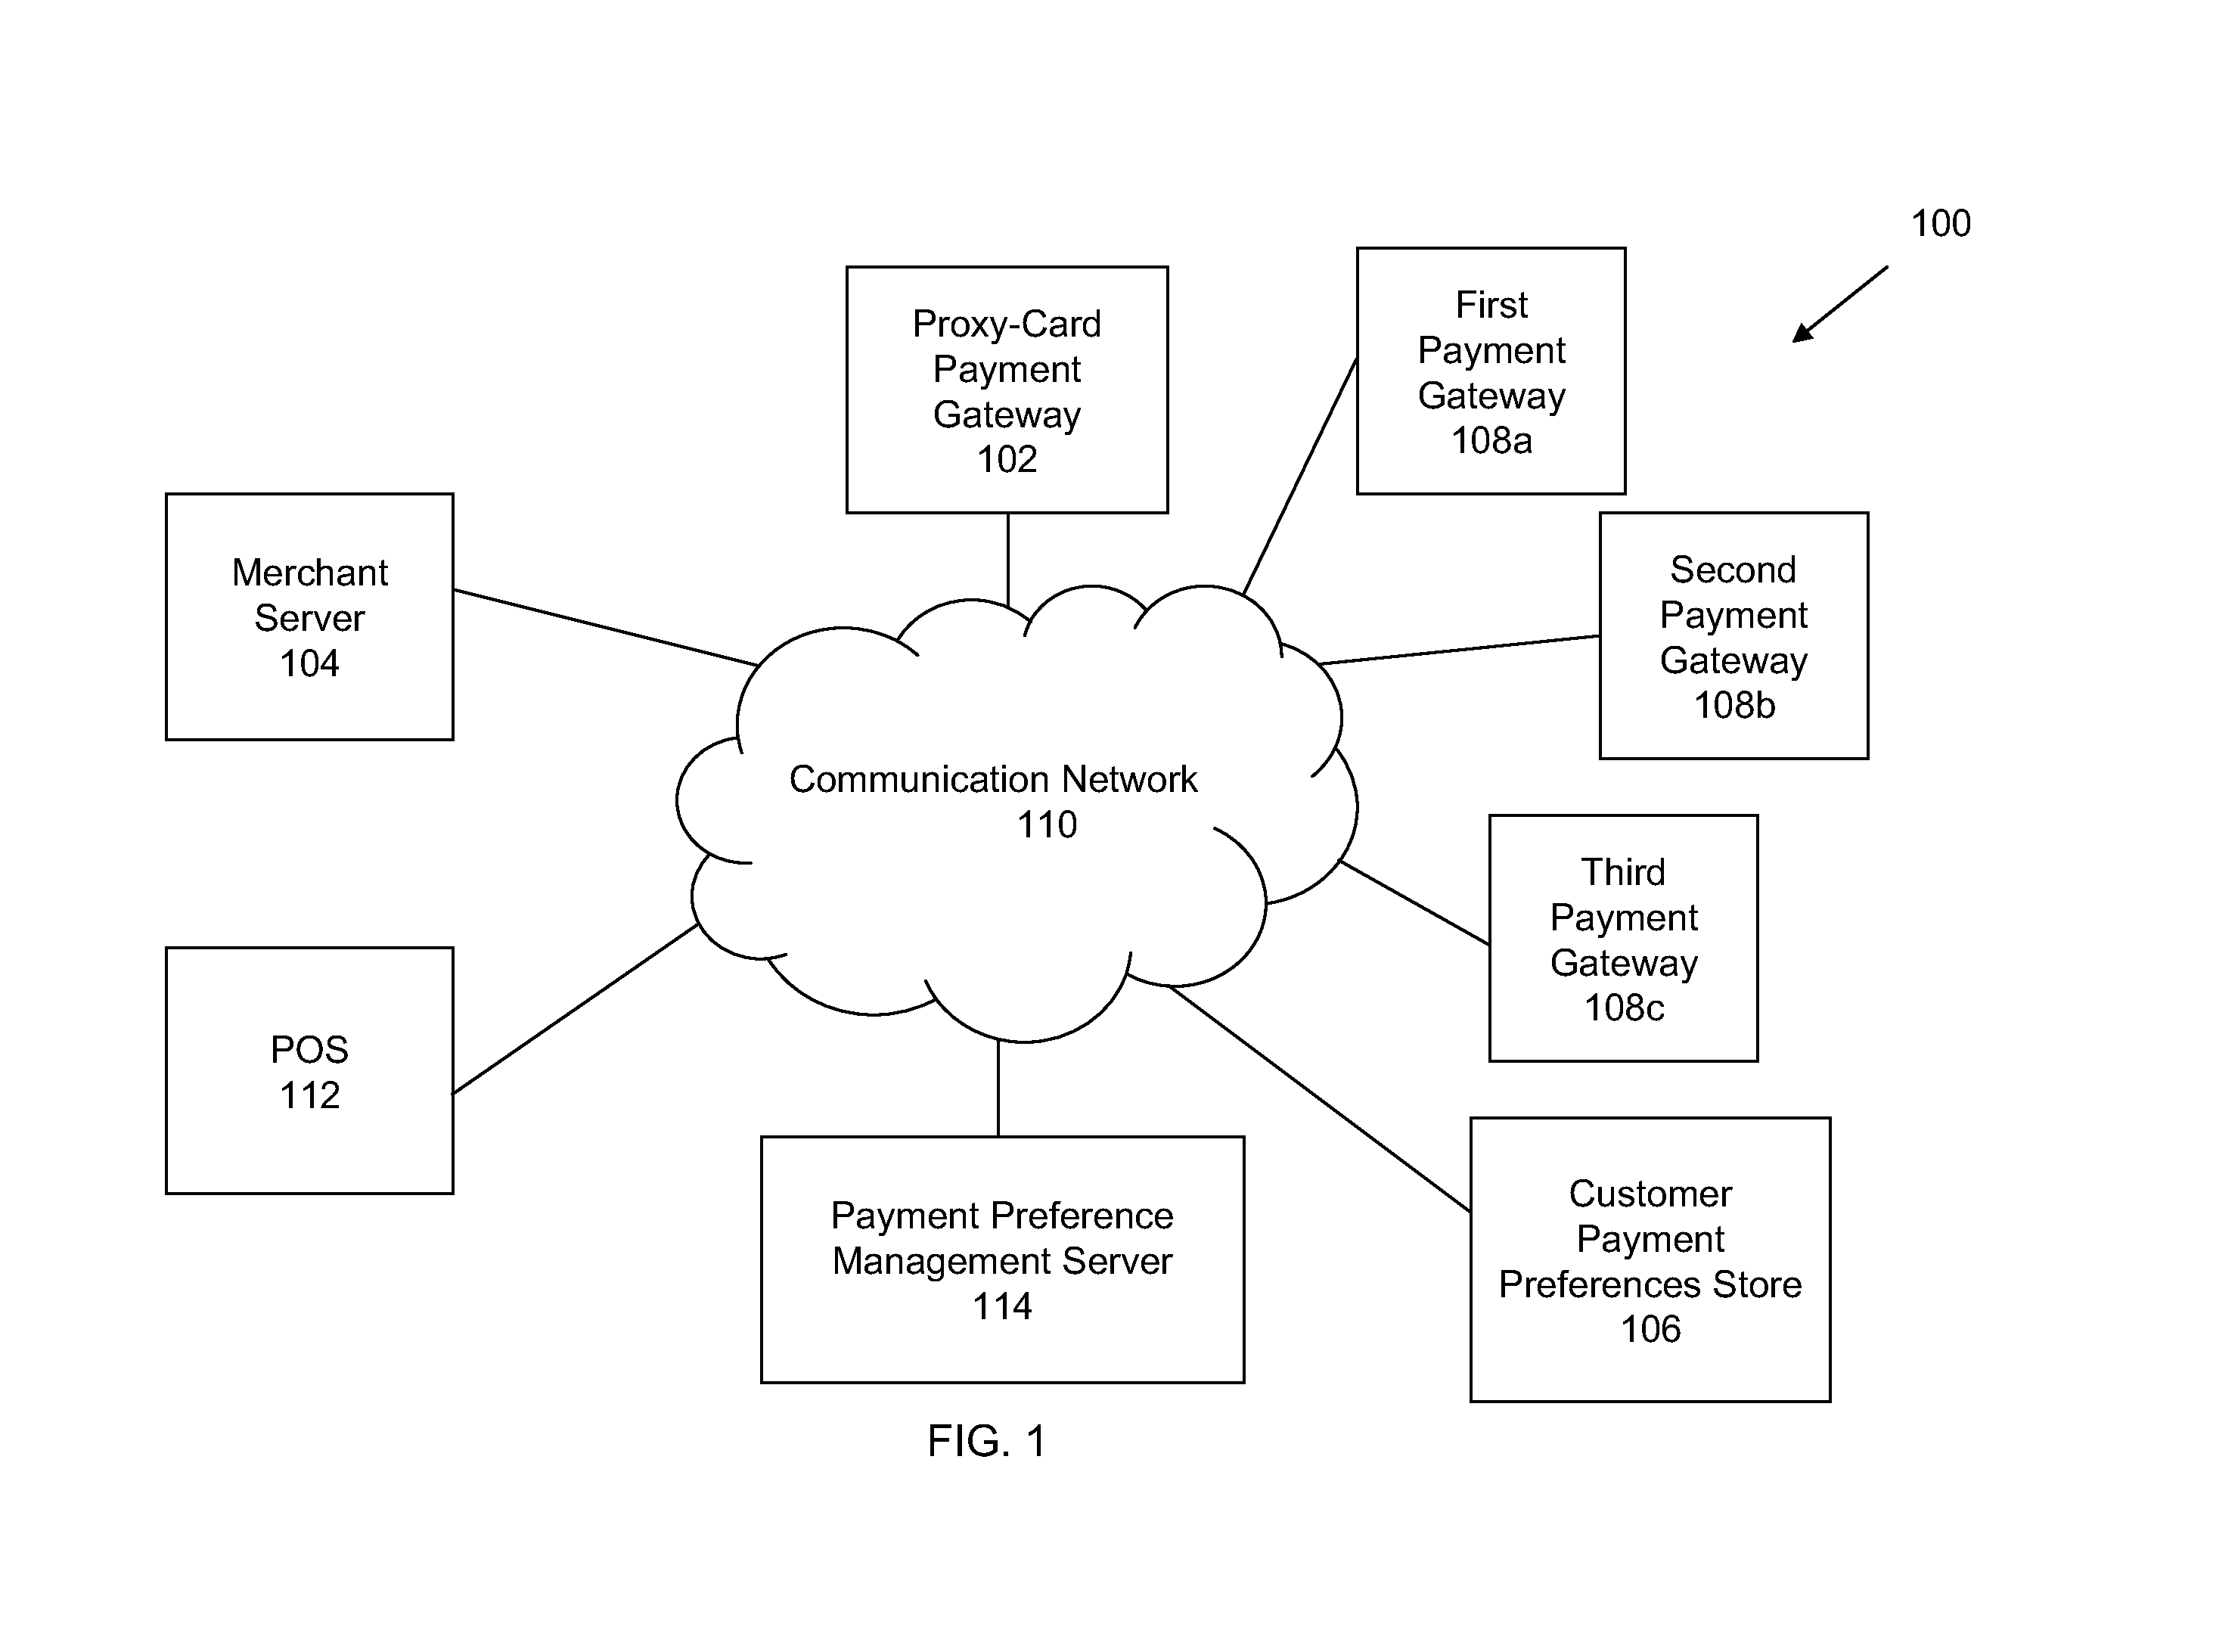 Systems, methods, and computer products for processing payments using a proxy card